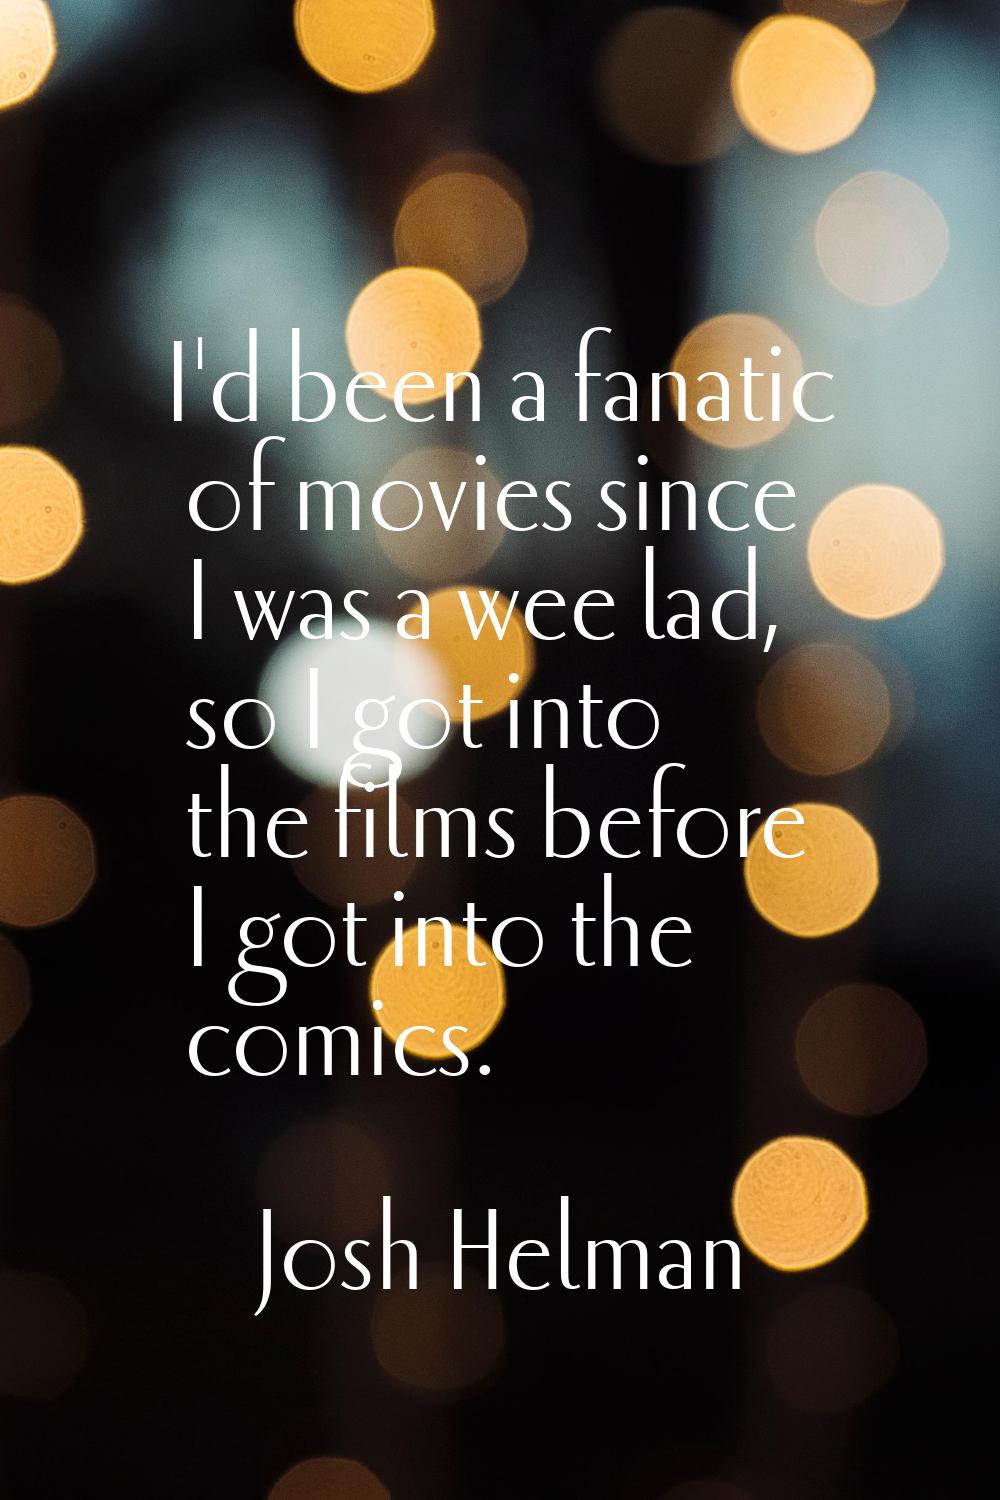 I'd been a fanatic of movies since I was a wee lad, so I got into the films before I got into the c